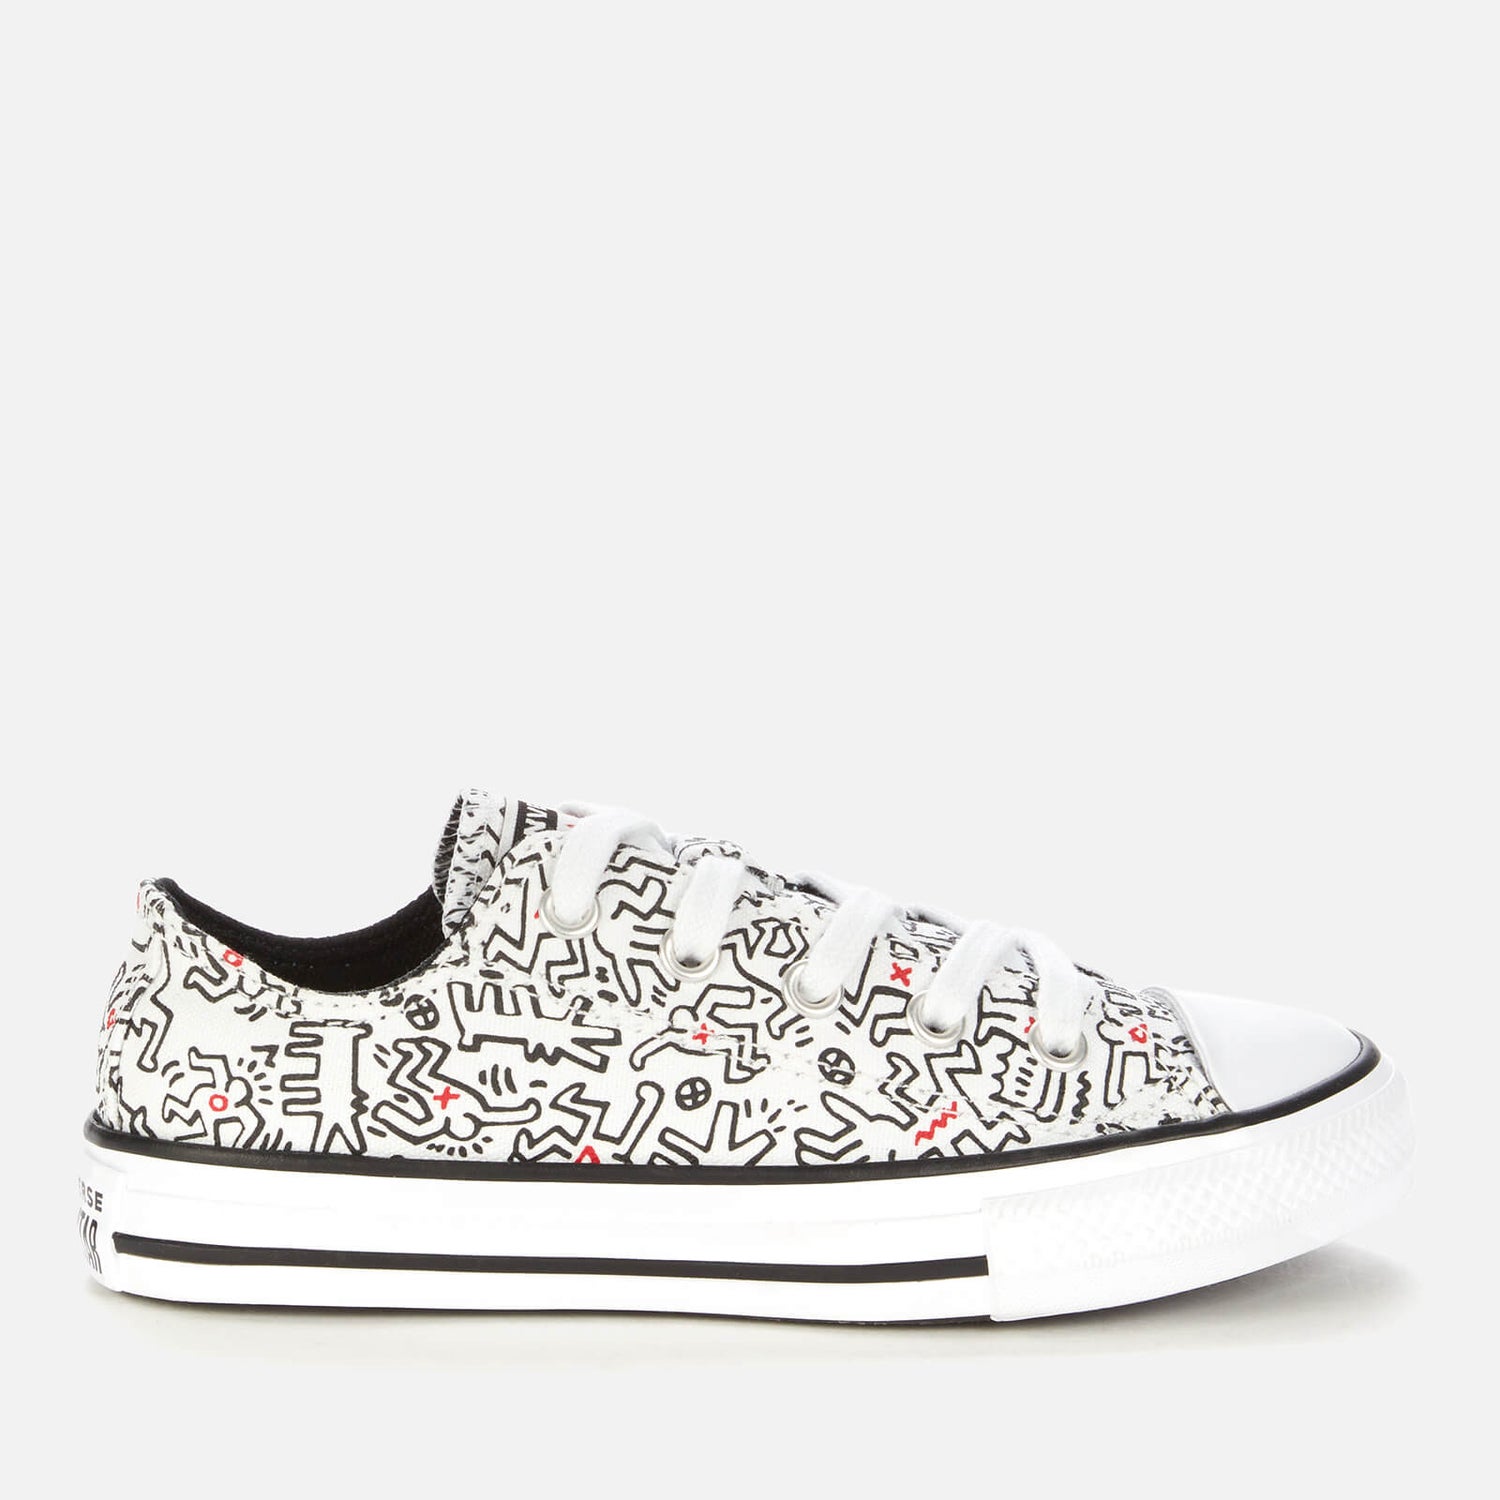 Converse Kids' Keith Haring Chuck Taylor All Star Ox Trainers - White/Black/Red